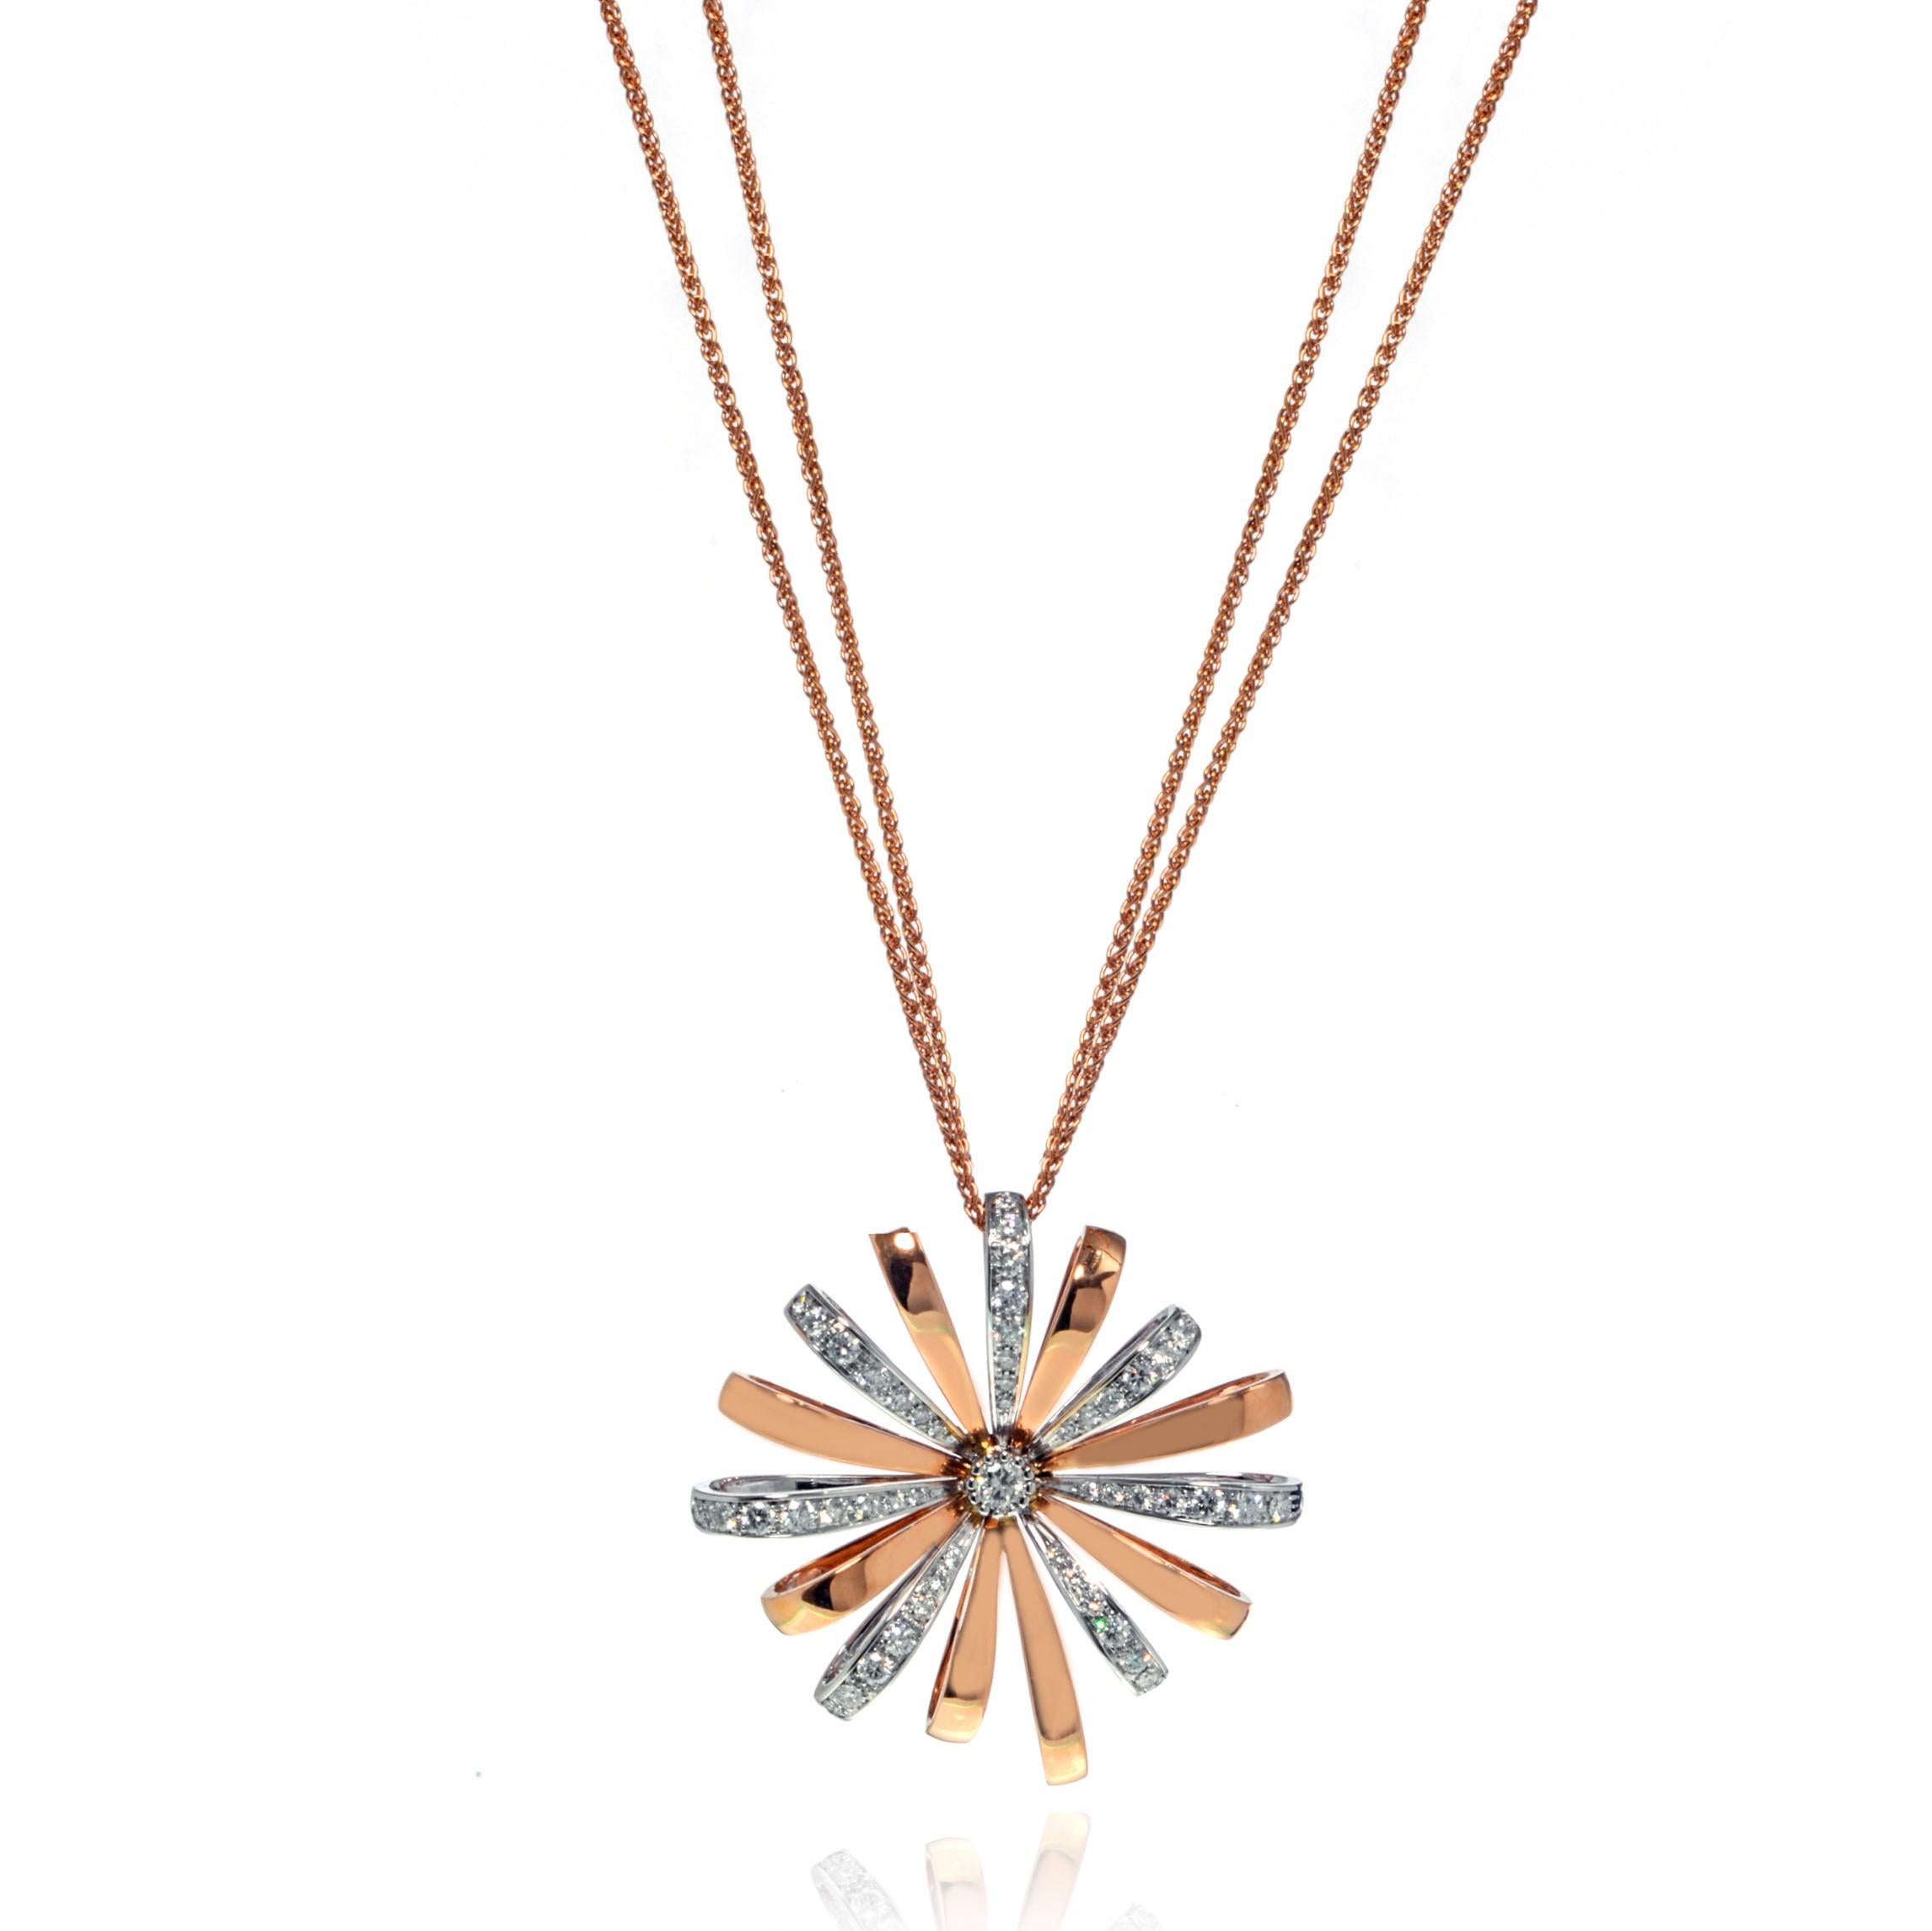 Beautiful Luca Carati 18k rose and white gold large diamond flower pendant long necklace. Features a gorgeous display of Brilliant pave Diamonds 1.28Cttw. Diamond color G and VVS-VS clarity. Chain length: 30 inches. Pendant size: 1.50 inches. Comes